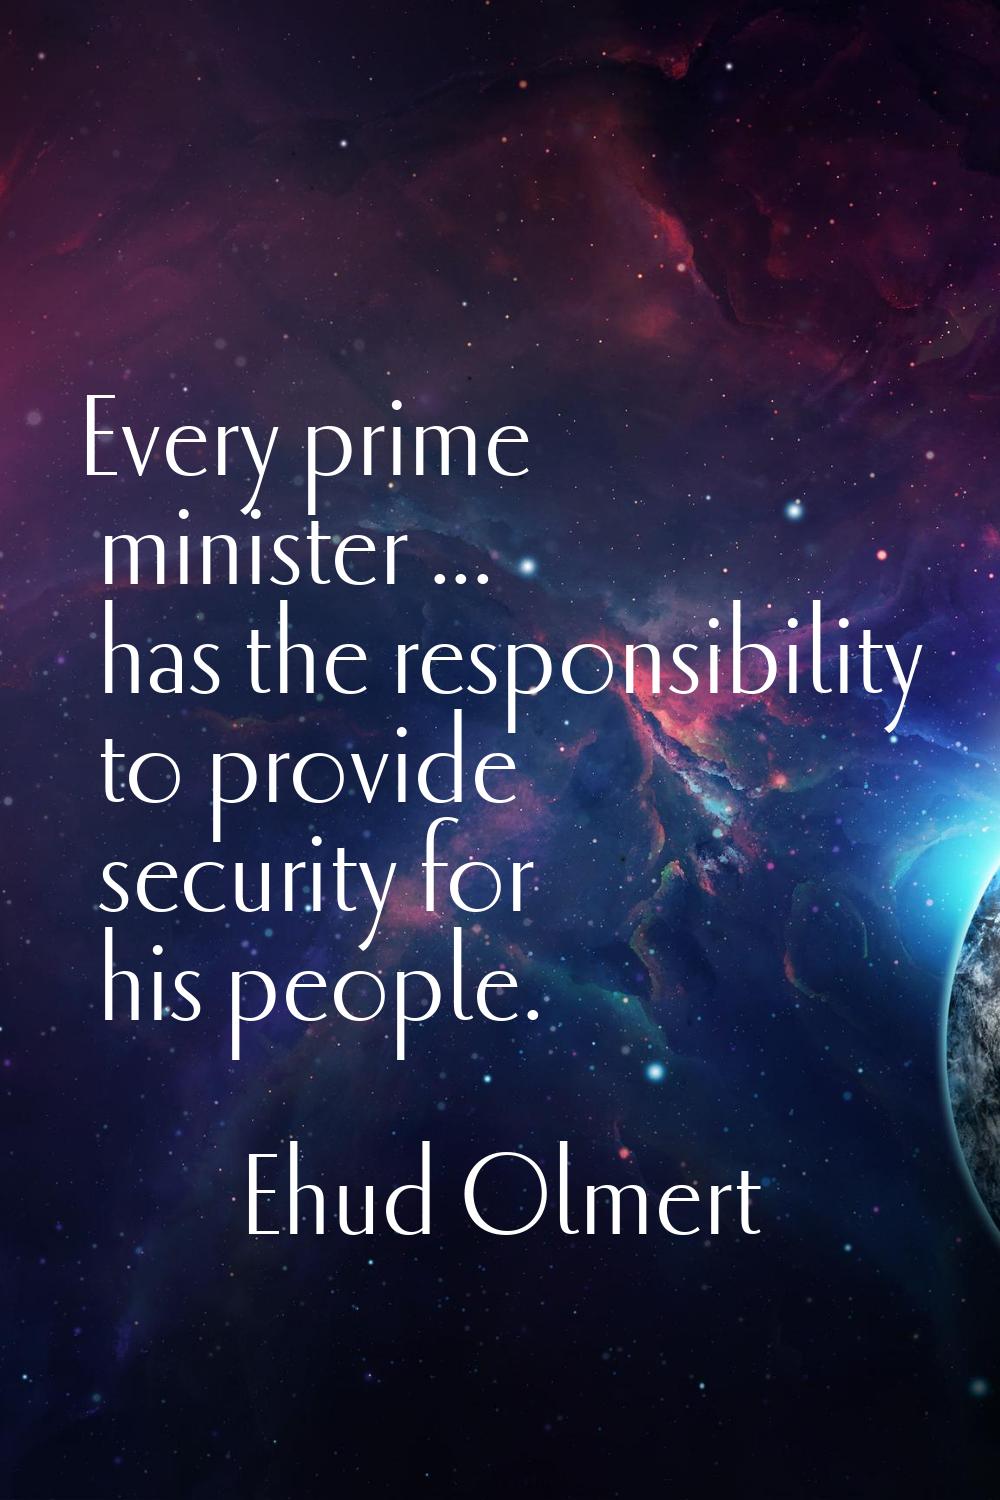 Every prime minister ... has the responsibility to provide security for his people.